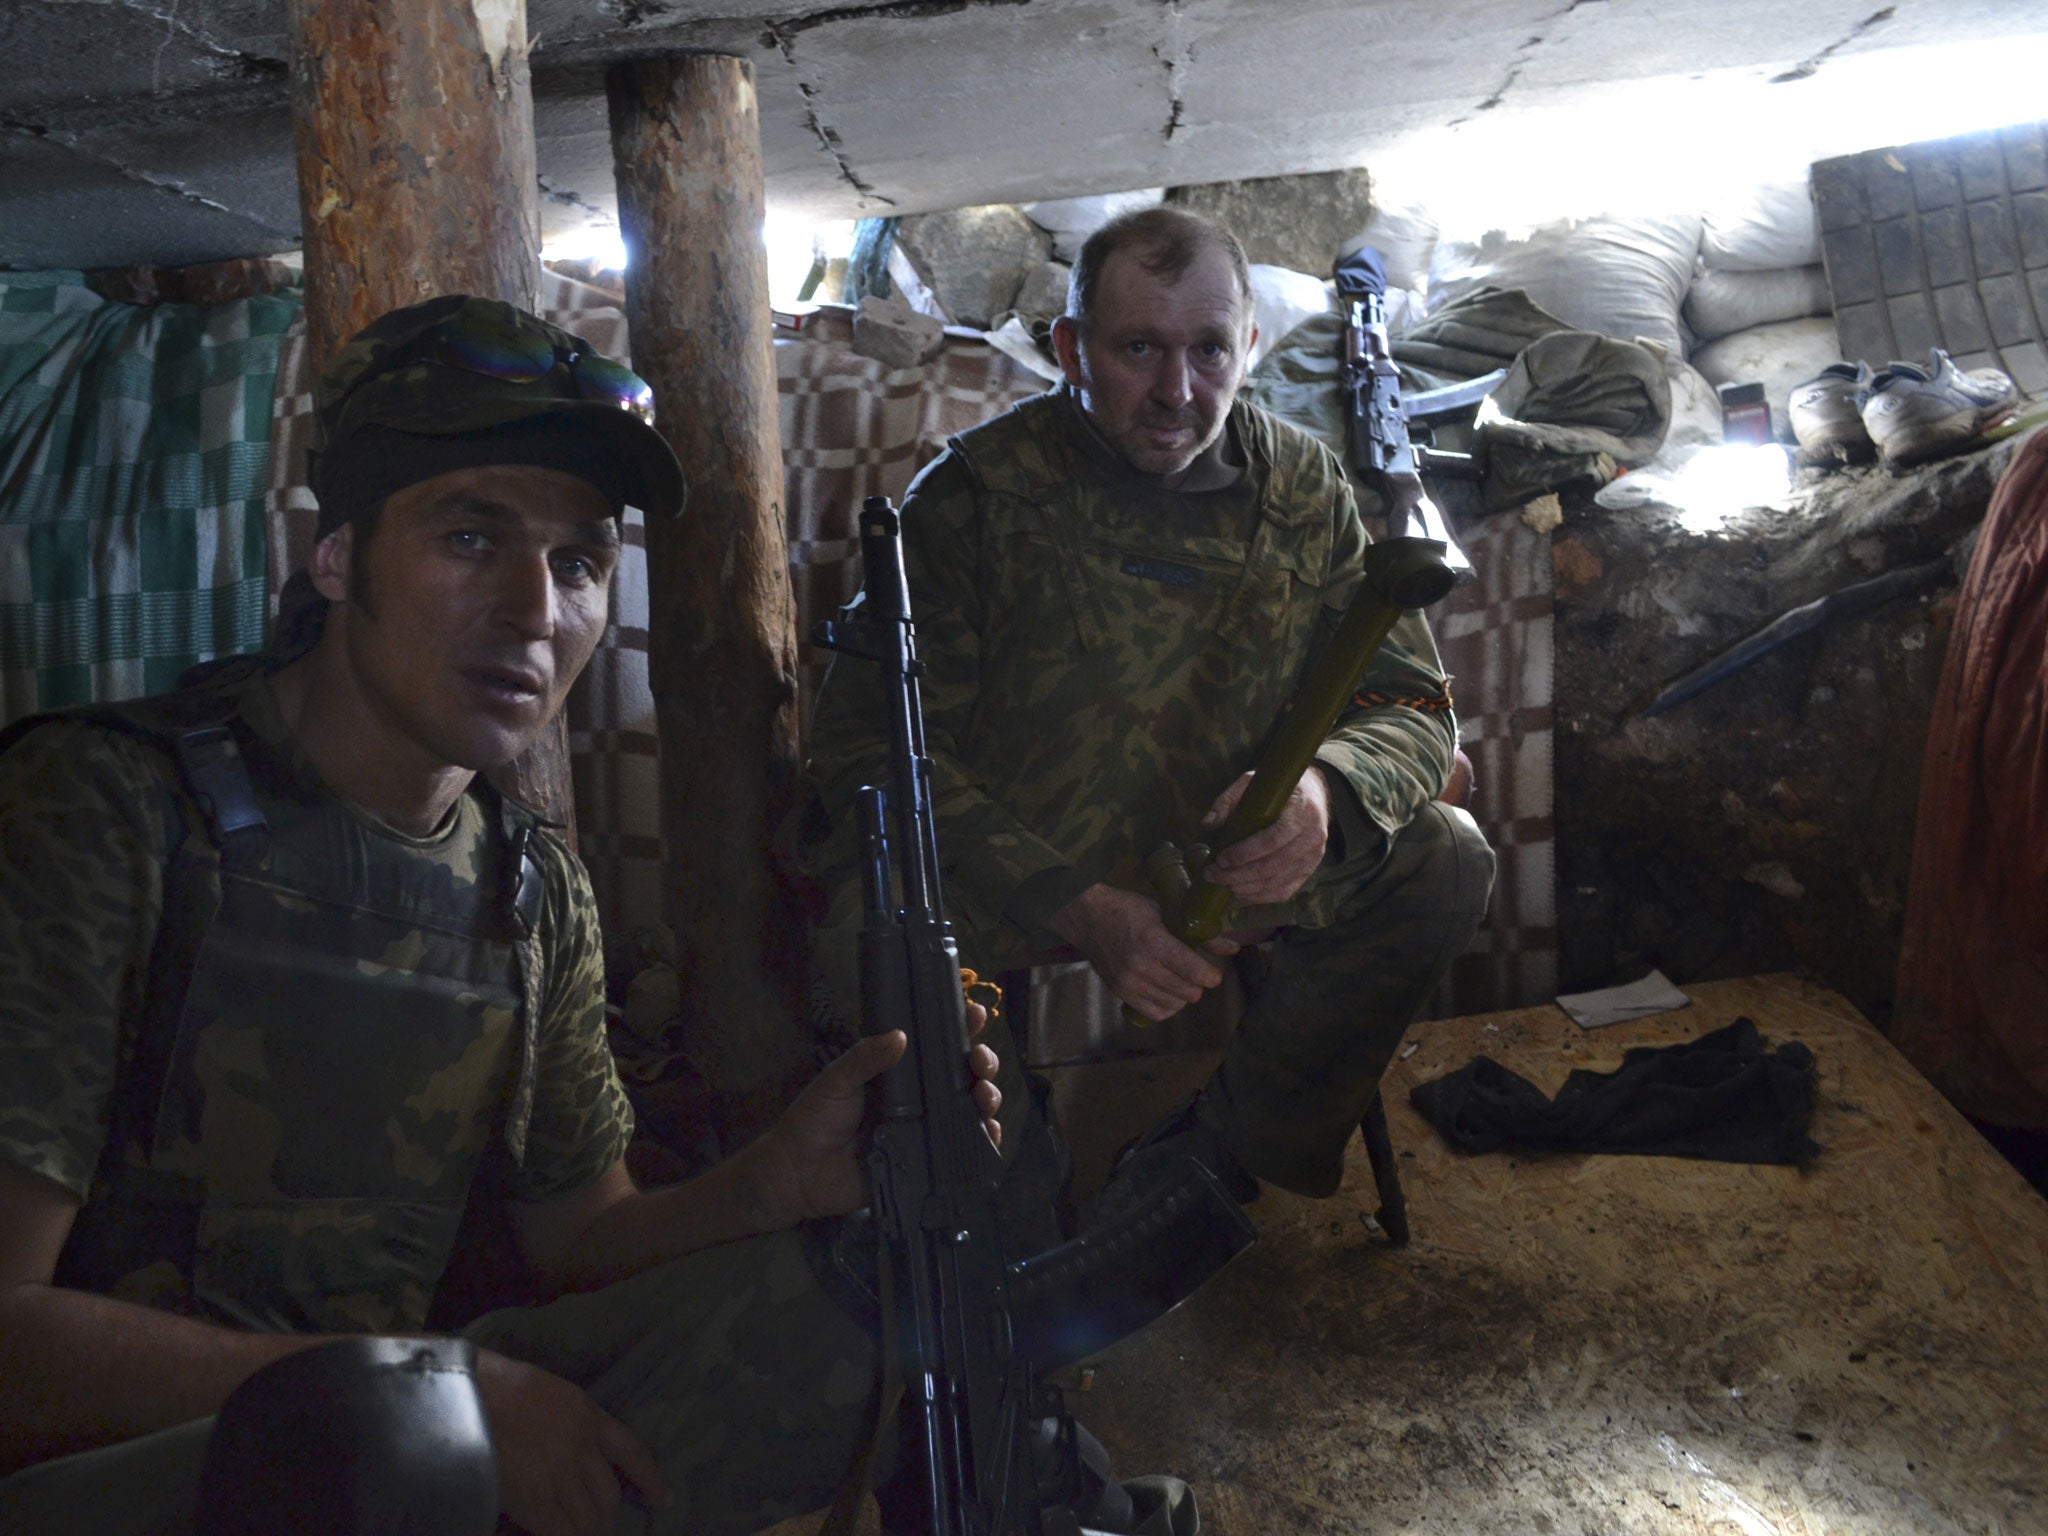 Pro-Russian fighters rest in a shelter at their position outside Slovyansk, eastern Ukraine, Sunday, June 22, 2014. Russian president Vladimir Putin said Sunday that fighting was continuing, including what he said was artillery fire from the Ukrainian side. Poroshenko has said his troops reserve the right to fire back if separatists attack them or civilians